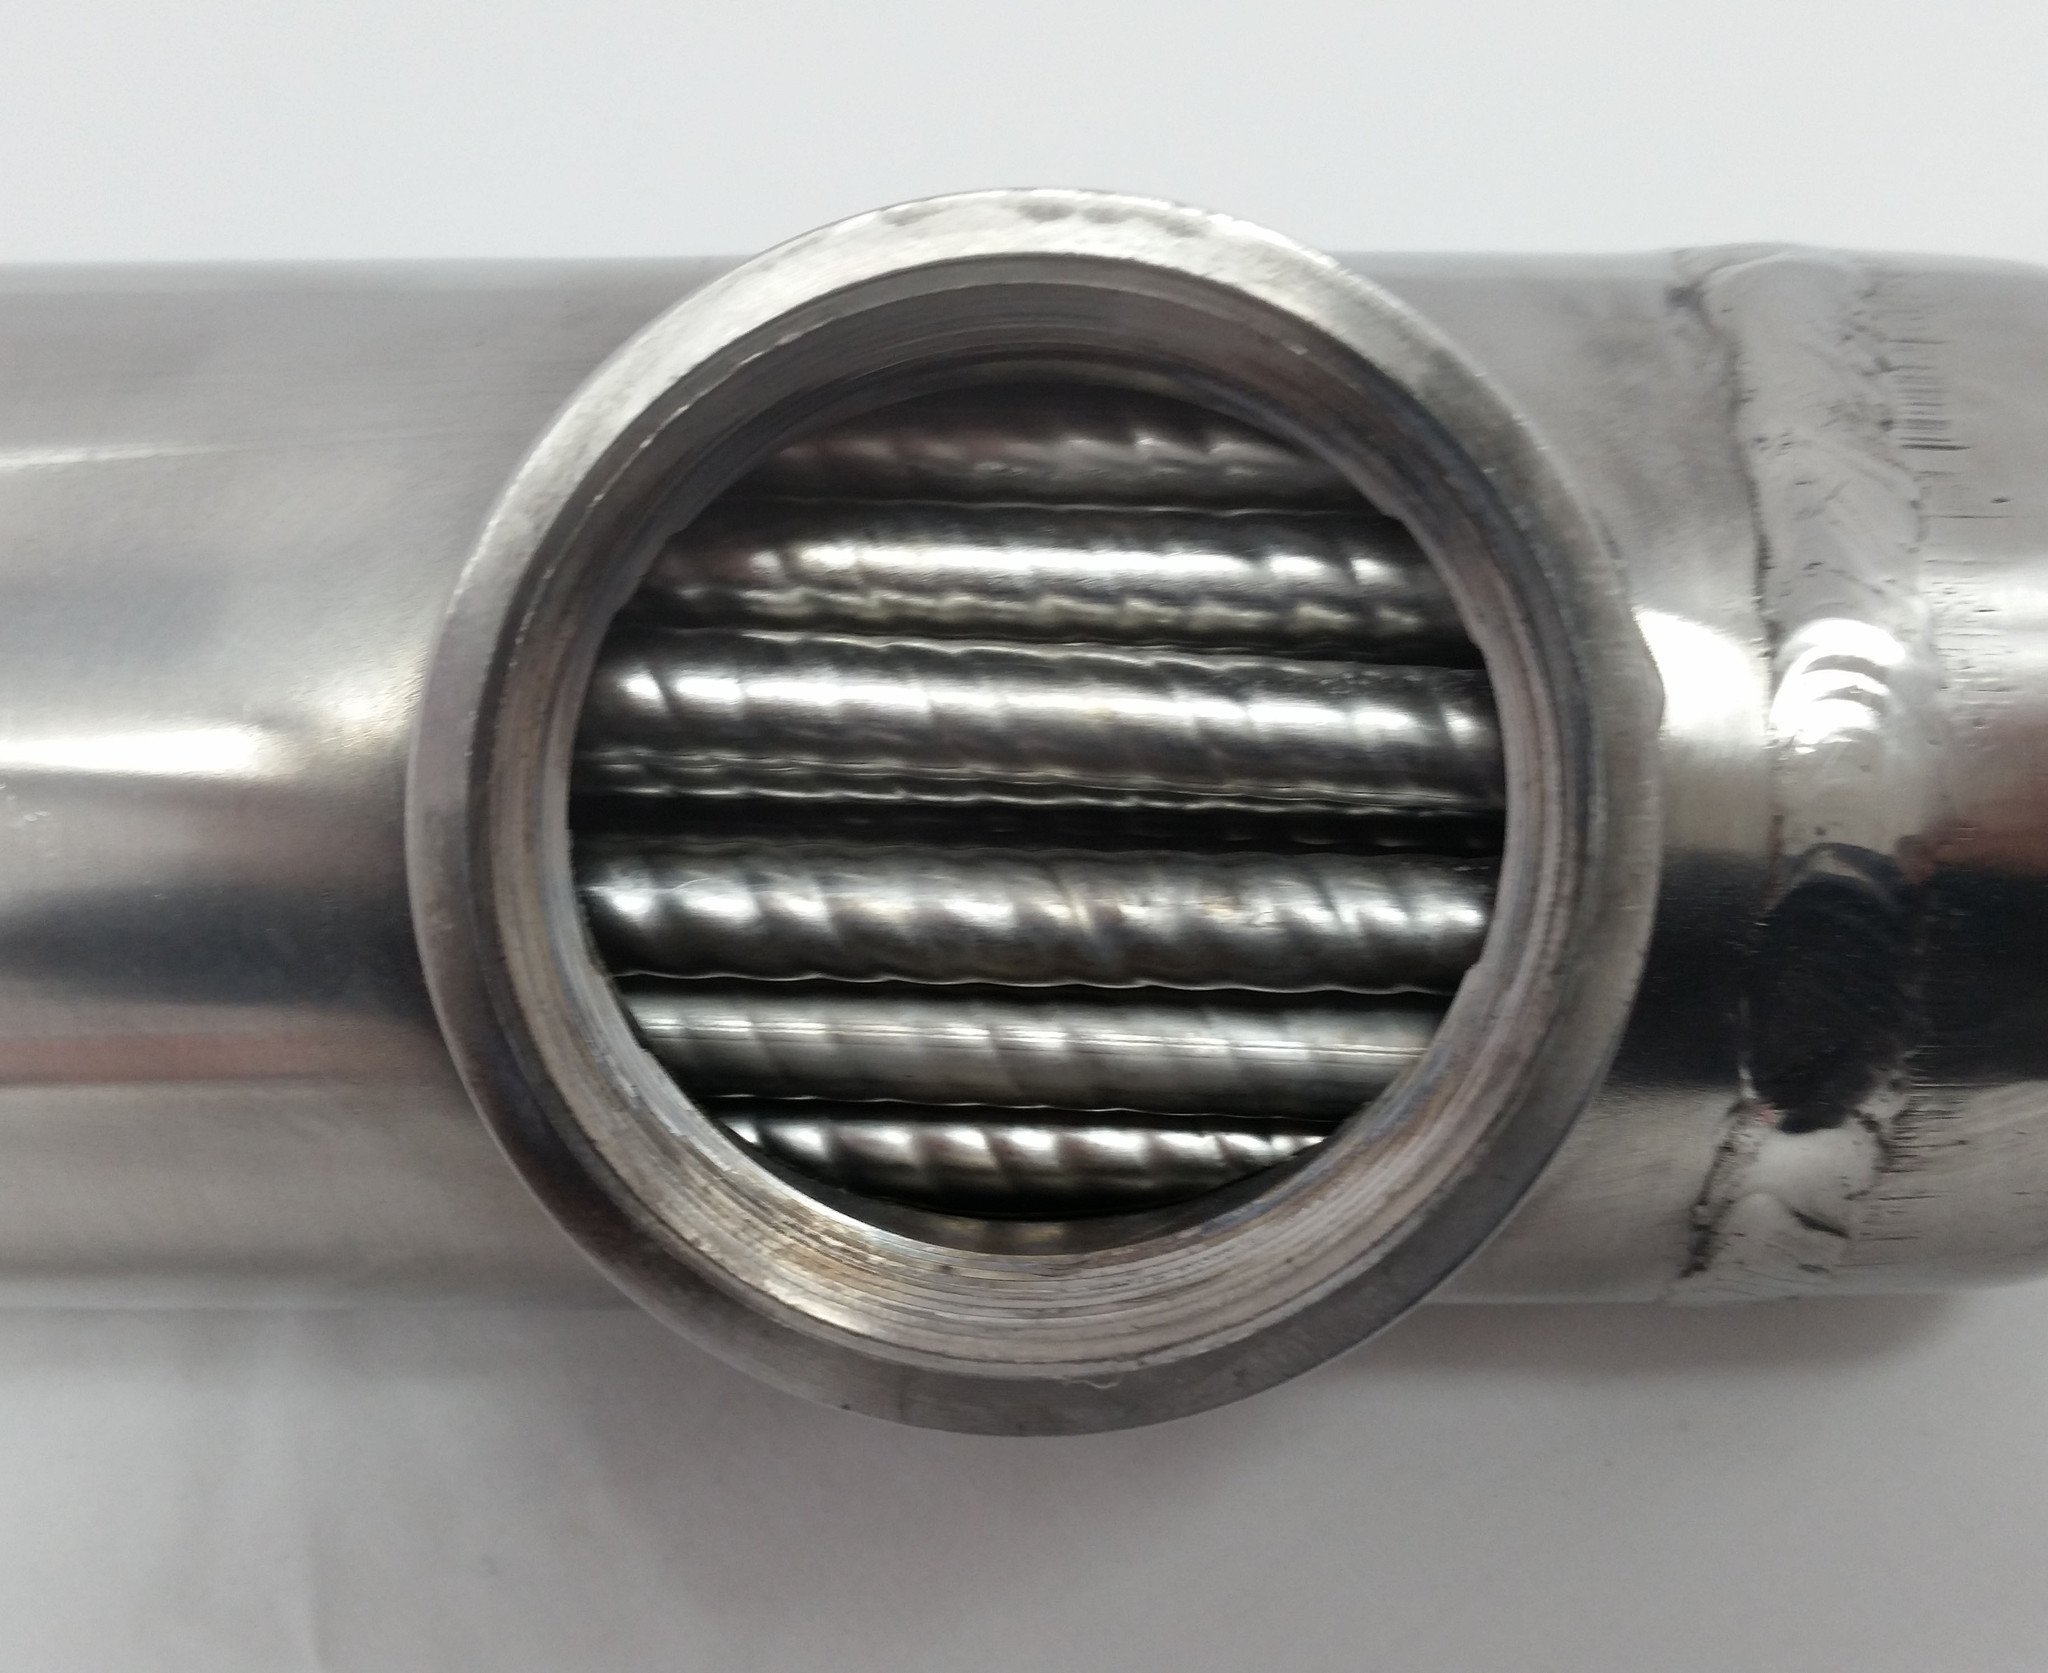 85,000 BTU Stainless Steel Tube and Shell Heat Exchanger for Pools/Spas os 